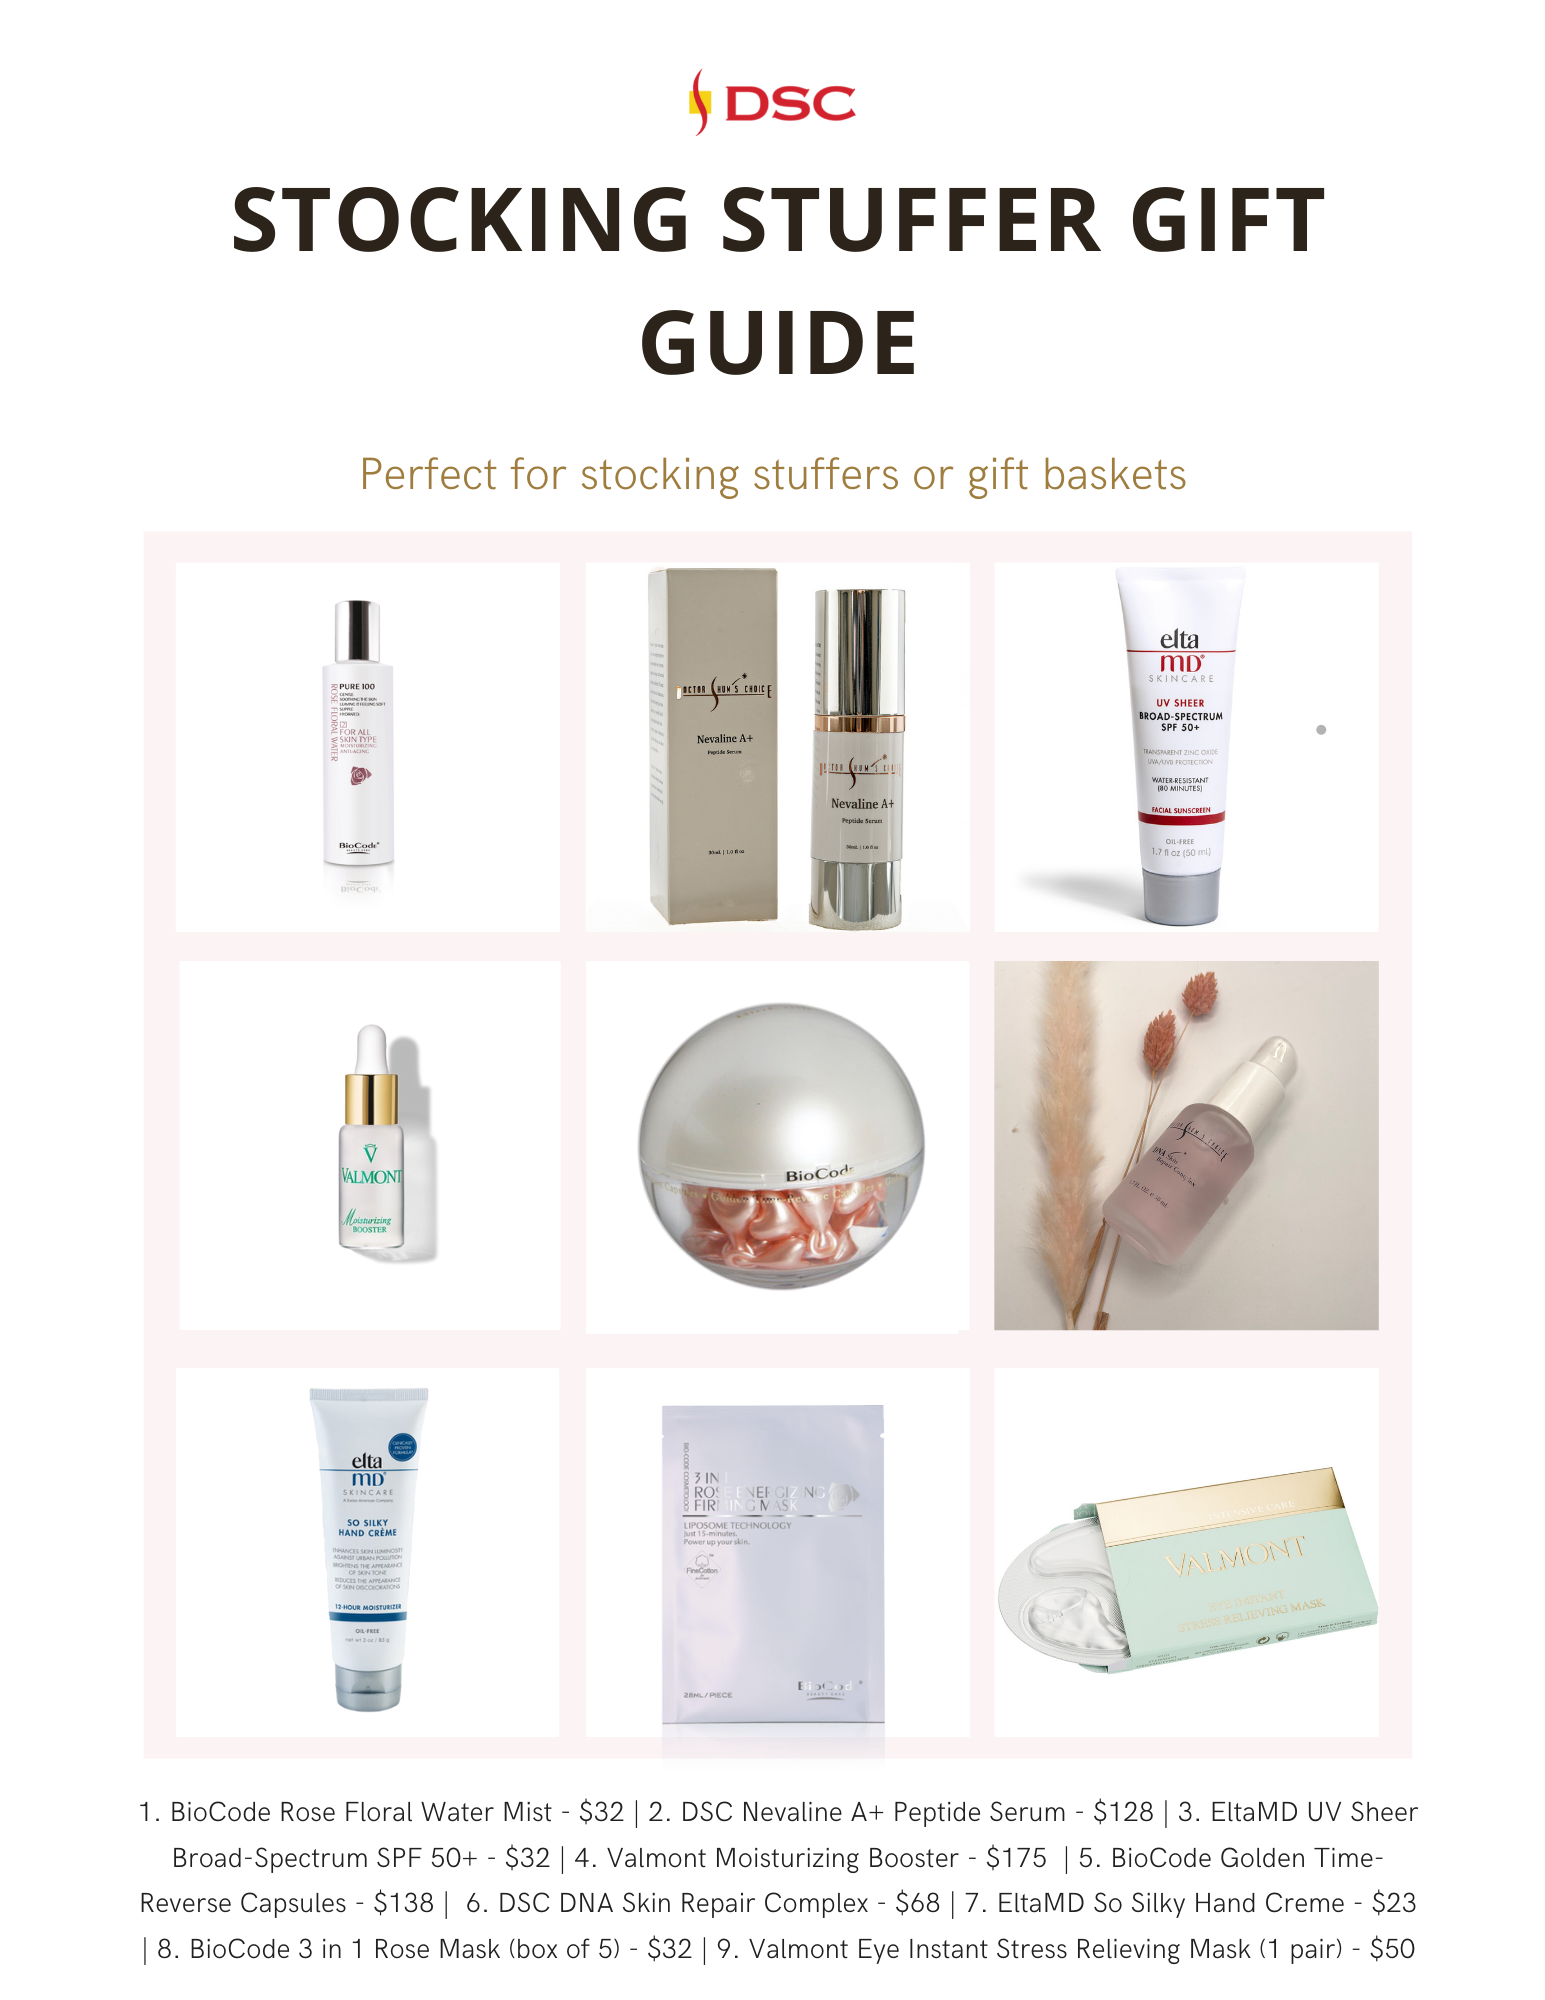 DSC stocking stuffer gift guide graphic of 9 skincare products with the text "Perfect for stocking stuffers or gift baskets" at the top and the text "1. BioCode Rose Floral Water Mist - $32 | 2. DSC Nevaline A+ Peptide Serum - $128 | 3. EltaMD UV Sheer Broad-Spectrum SPF 50+ - $32 | 4. Valmont Moisturizing Booster - $175 | 5. BioCode Golden Time-Reverse Capsules - $138 | 6. DSC DNA Skin Repair Complex - $68 | 7. EltaMD So Silky Hand Creme - $23 | 8. BioCode 3 in 1 Rose Mask (box of 5) - $32 | 9. Valmont Eye Instant Stress Relieving Mask (1 pair) - $50" at the bottom